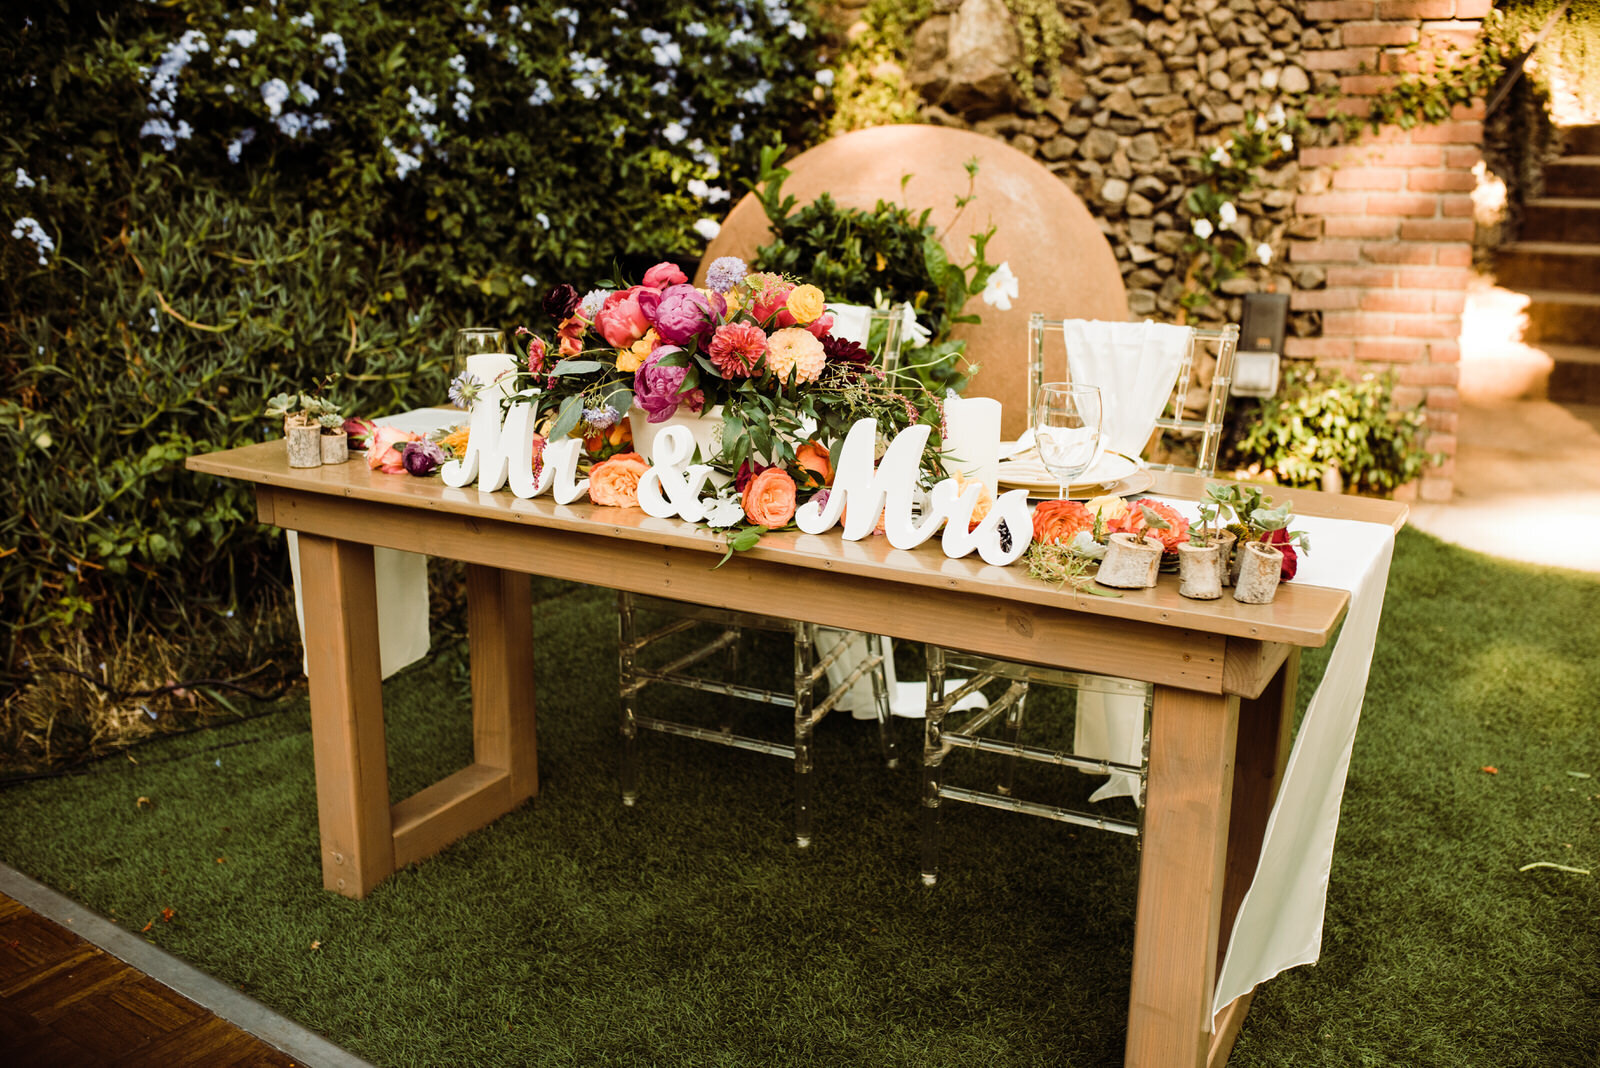 Bright, Colorful Sweetheart Table with Gold Place Settings at LA Houdini Estate Summer Wedding | photo by Kept Record | www.keptrecord.com